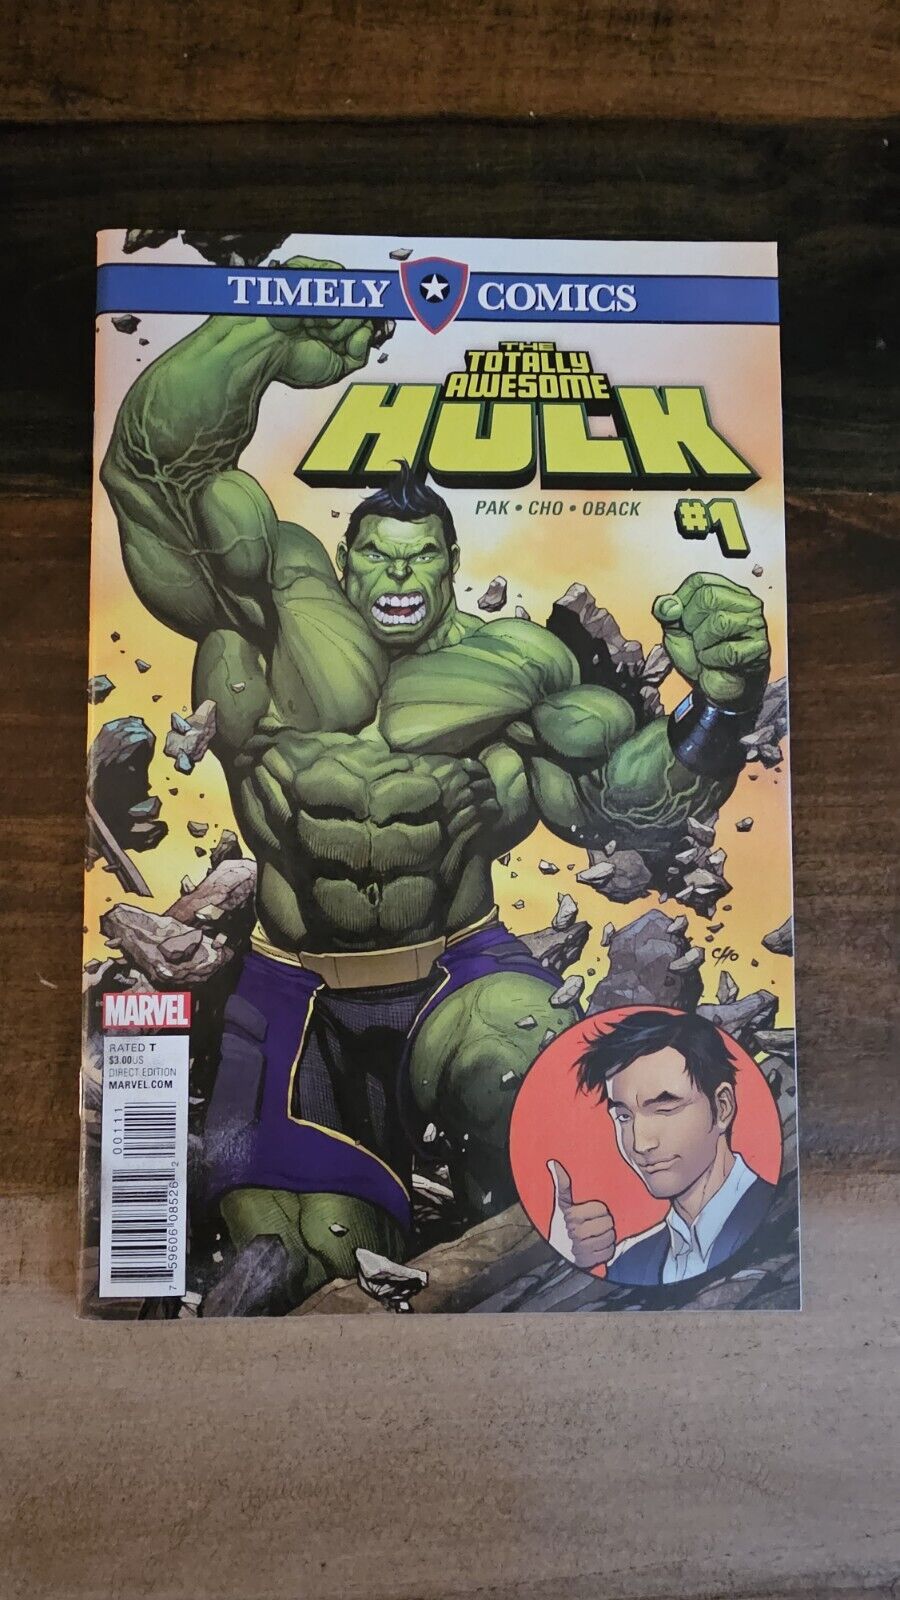 Totally Awesome Hulk # 1 1st Print Cho as Hulk Marvel Timely Comics